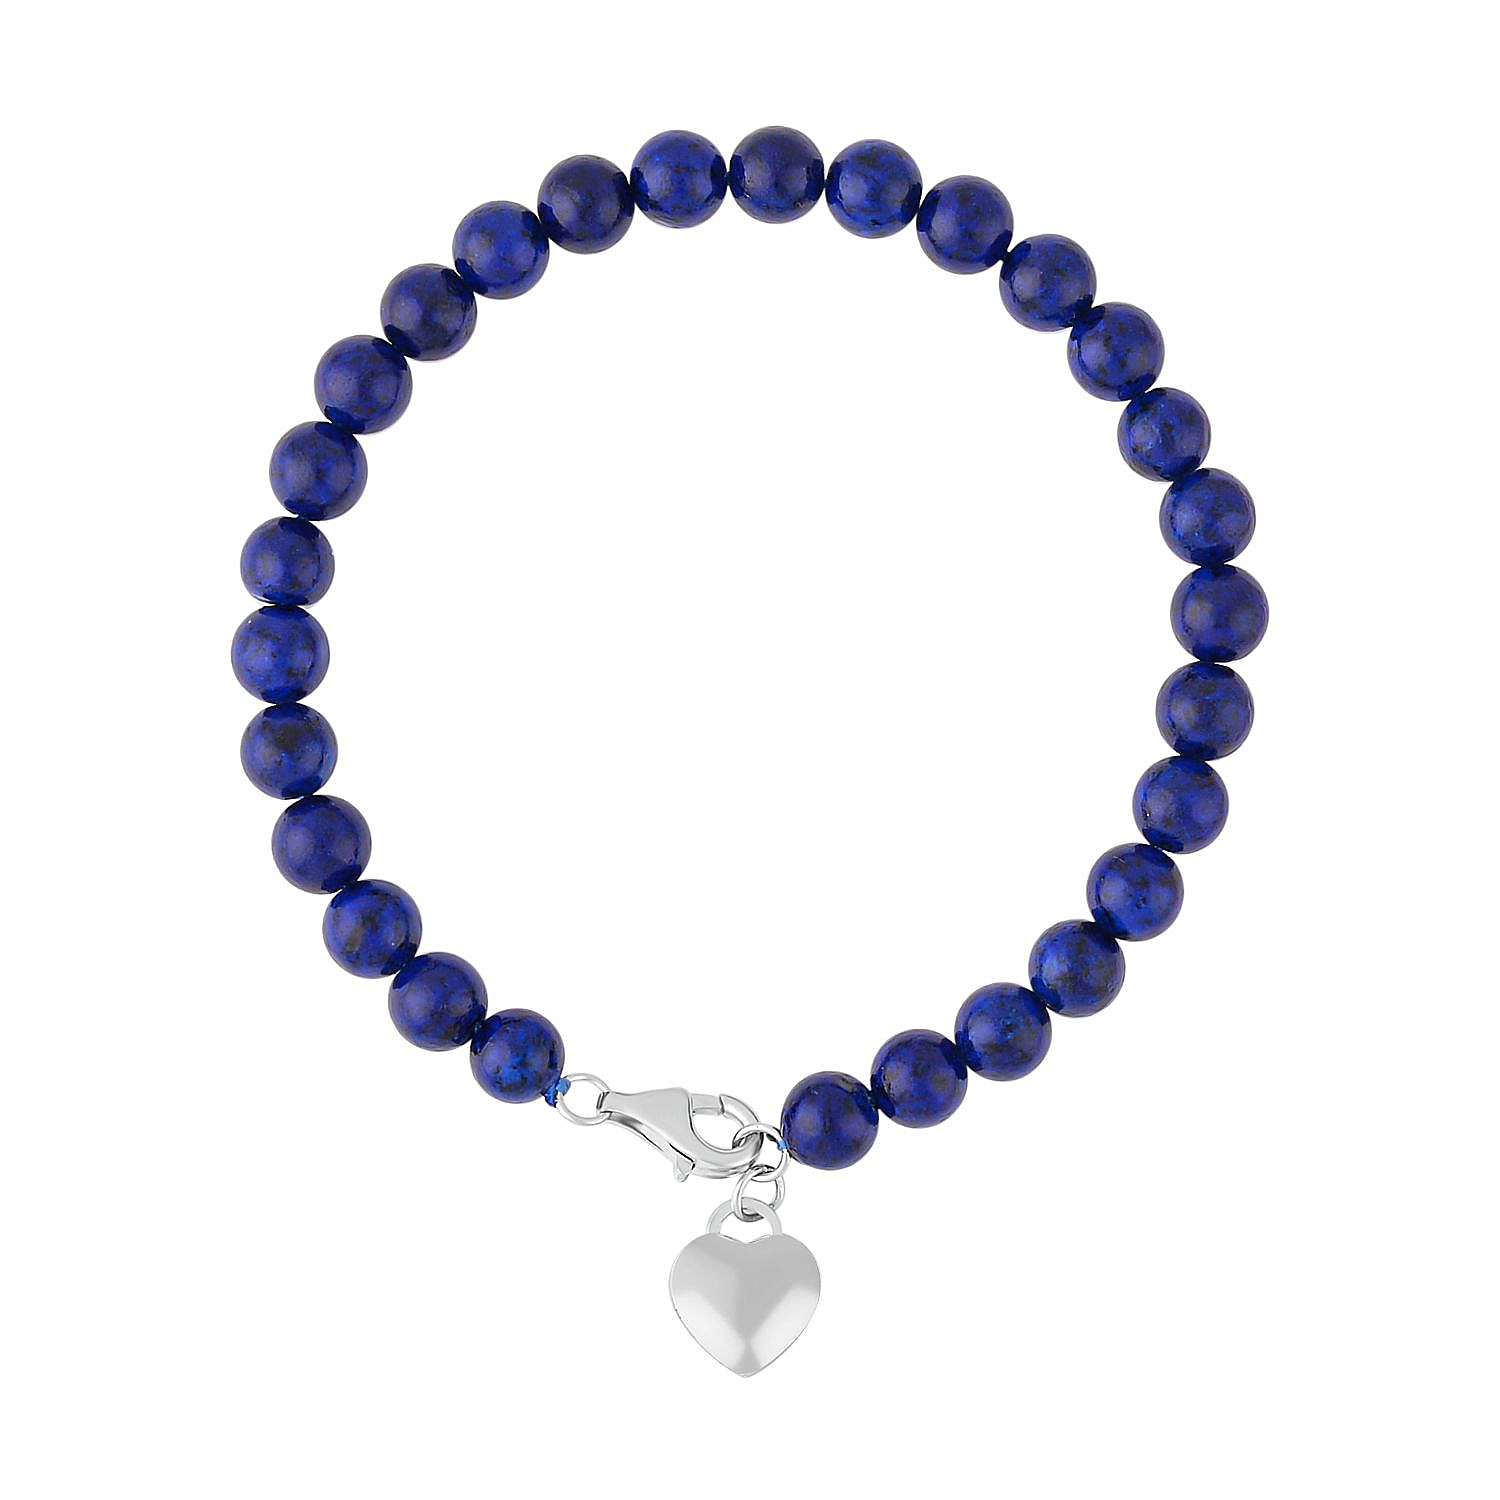 Lapis Lazuli Bracelet (Size - 7.5) with Lobster Clasp in Rhodium Overlay Sterling  Silver. - 7368363 - TJC